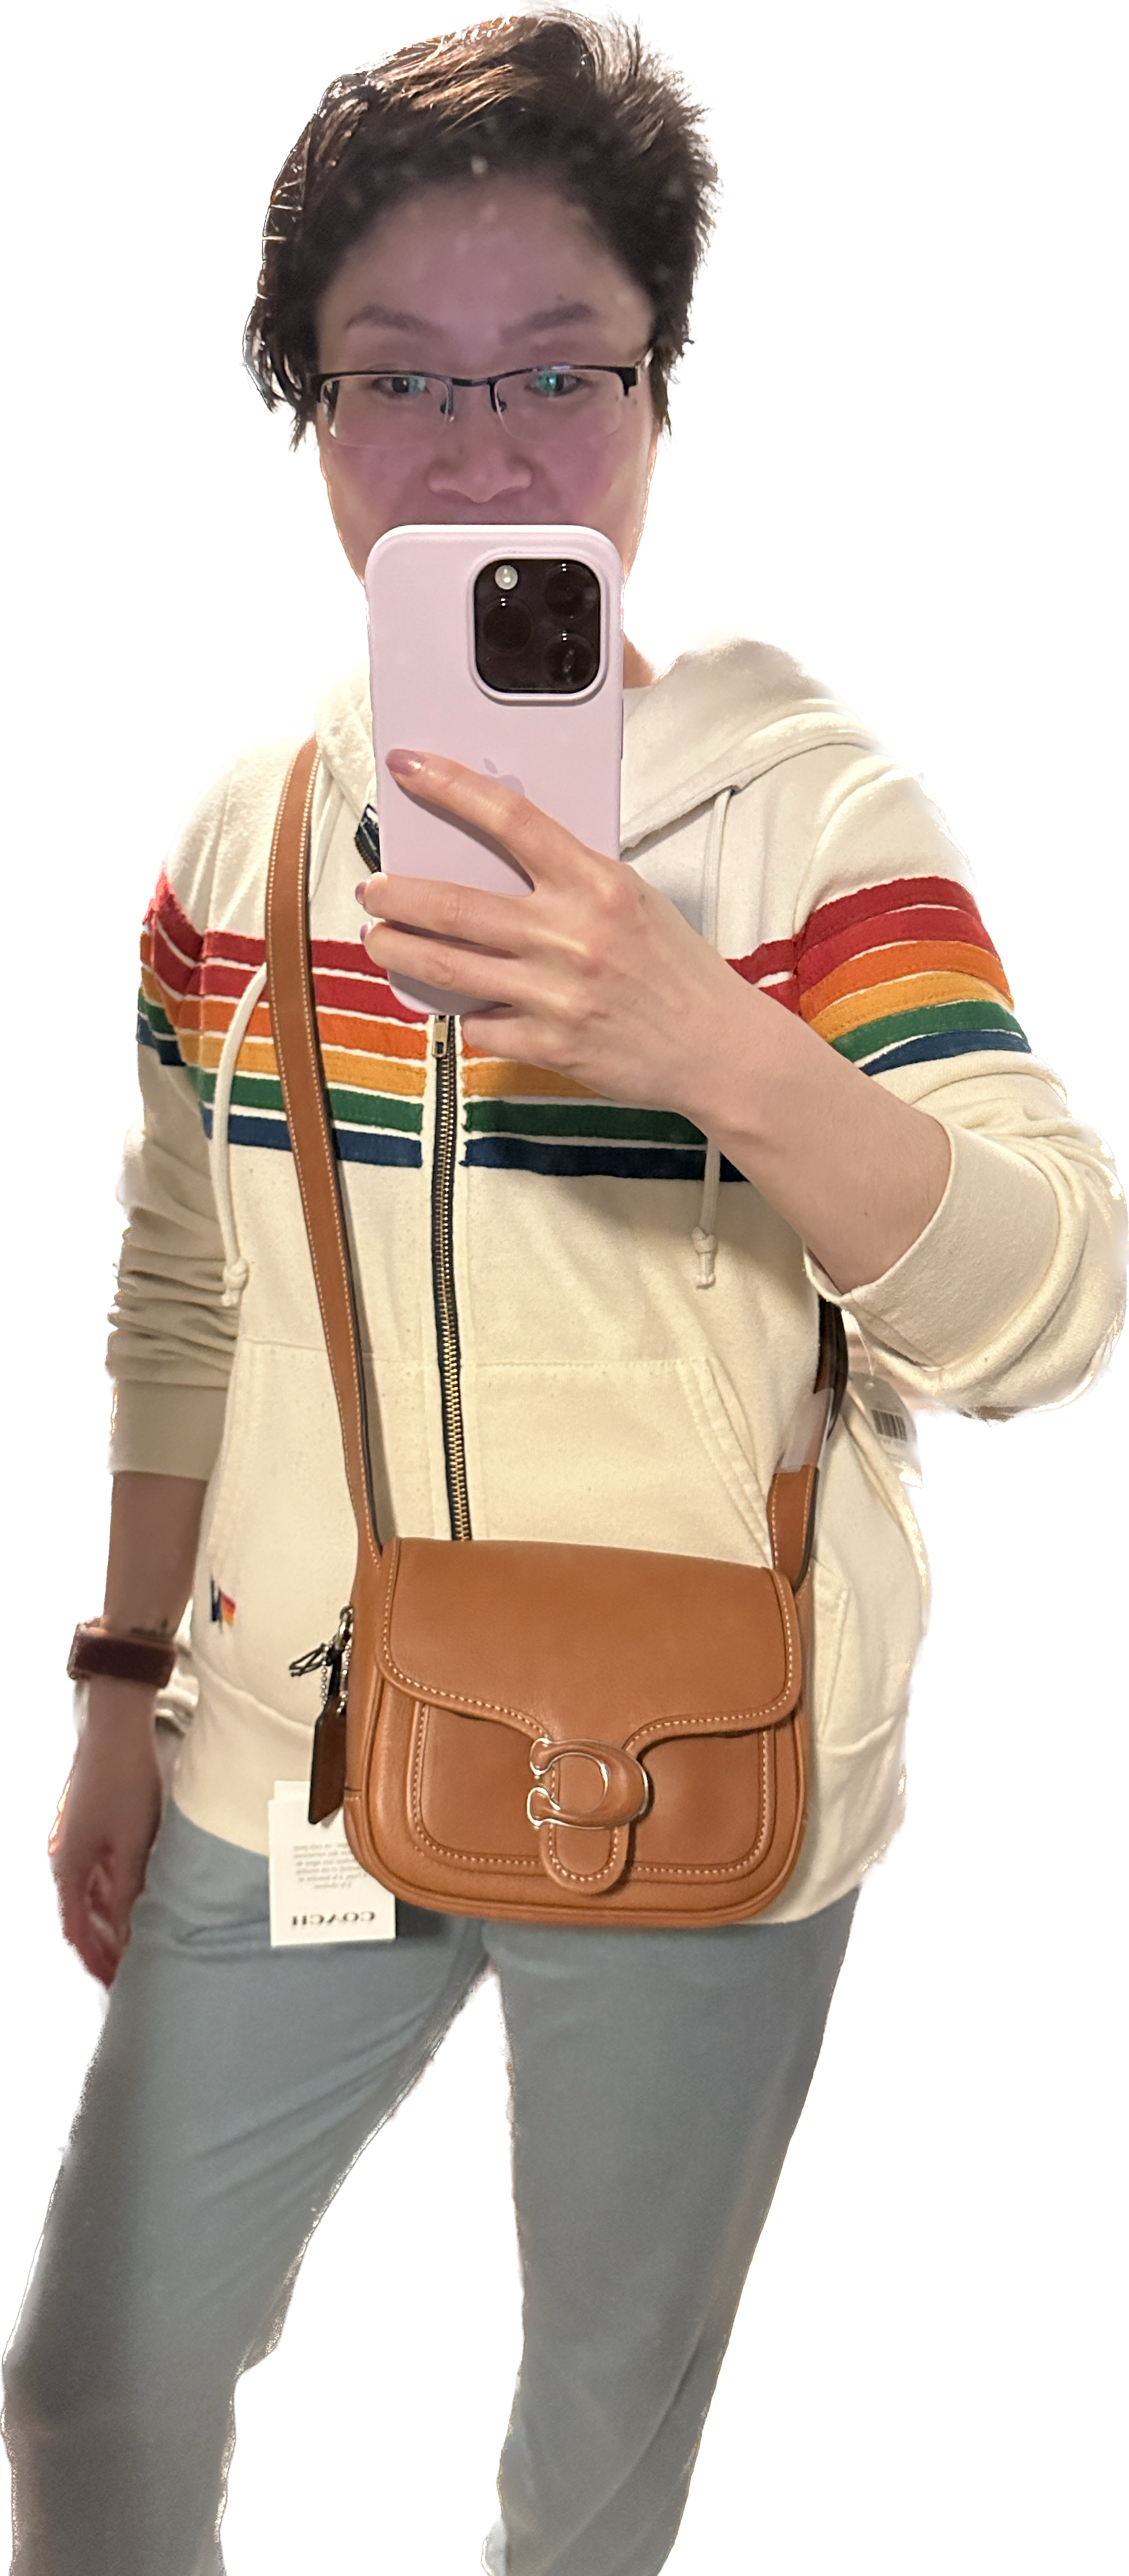 COACH Tabby Messenger 19 In Signature Canvas